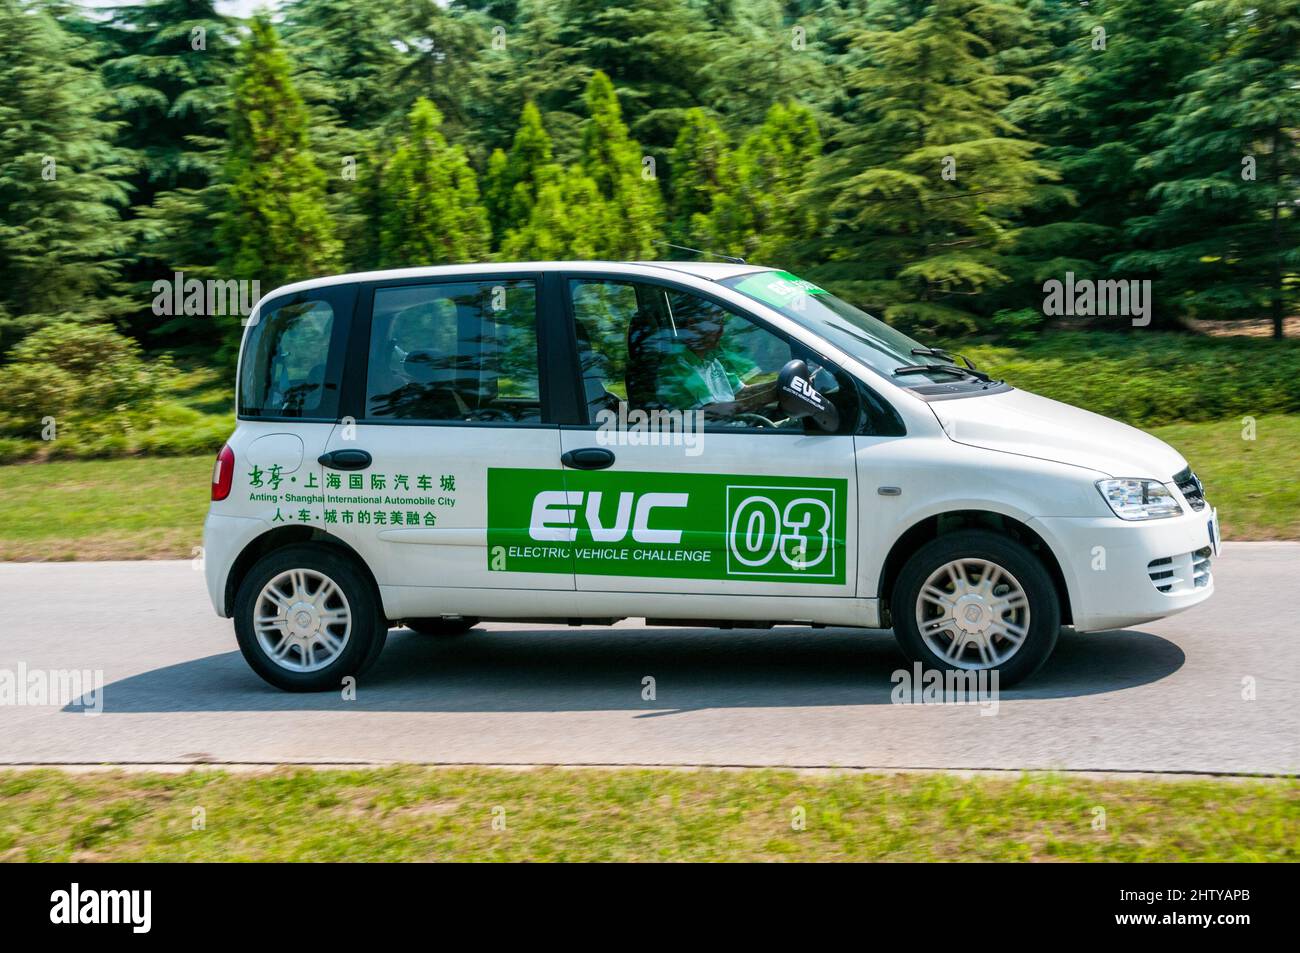 The Fiat Multipla based Zotye M300 EV, an early Chinese EV, being driven at the EV Zone in Anting, Shanghai, China. Stock Photo